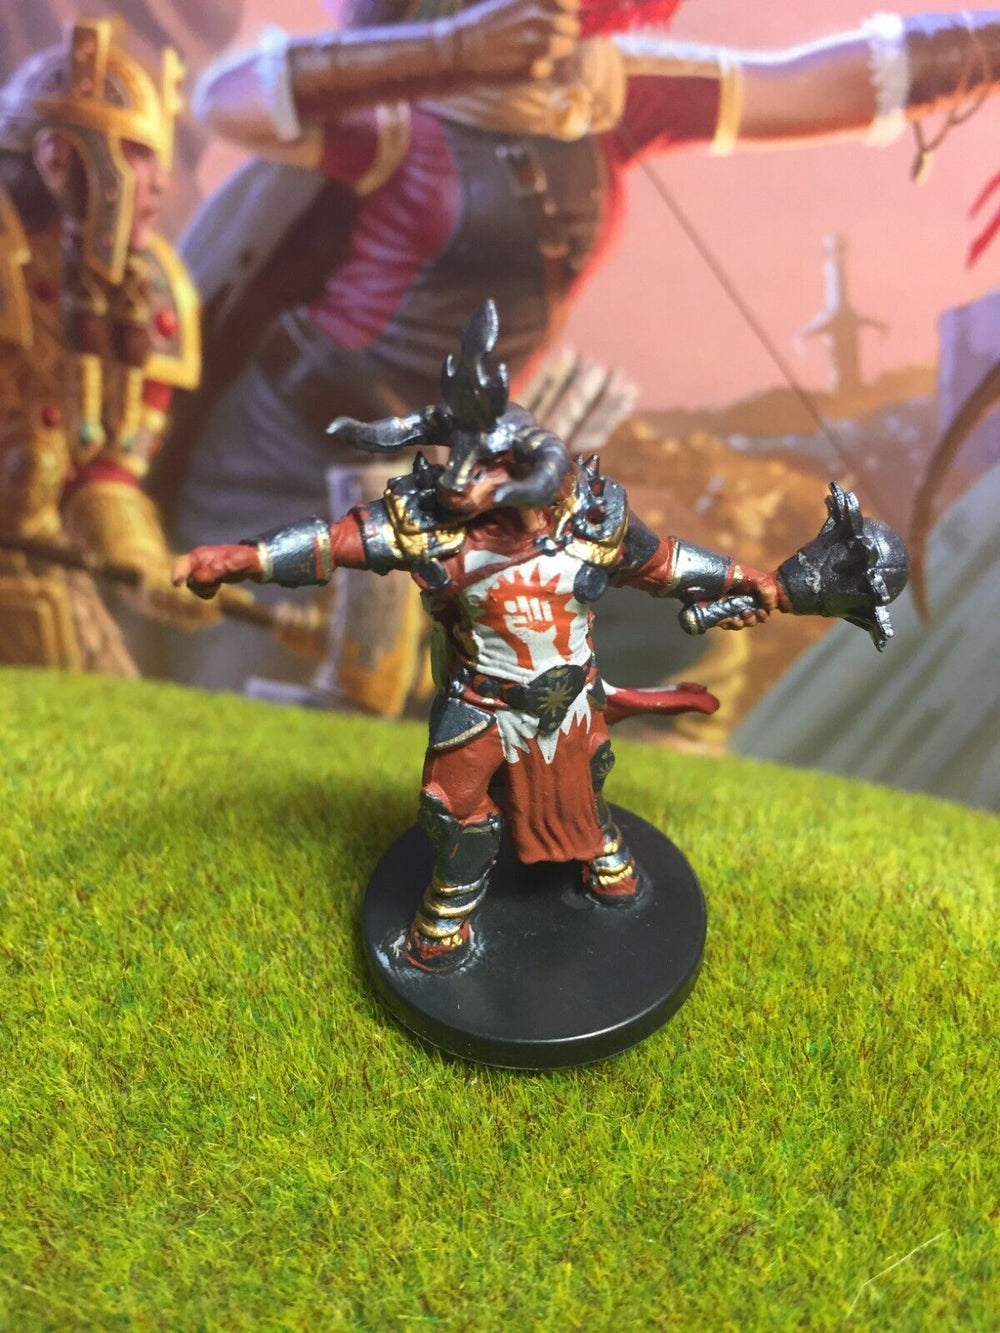 Minotaur Fighter D&D Miniature Dungeons Dragons Guildmasters Guide to Ravnica 46